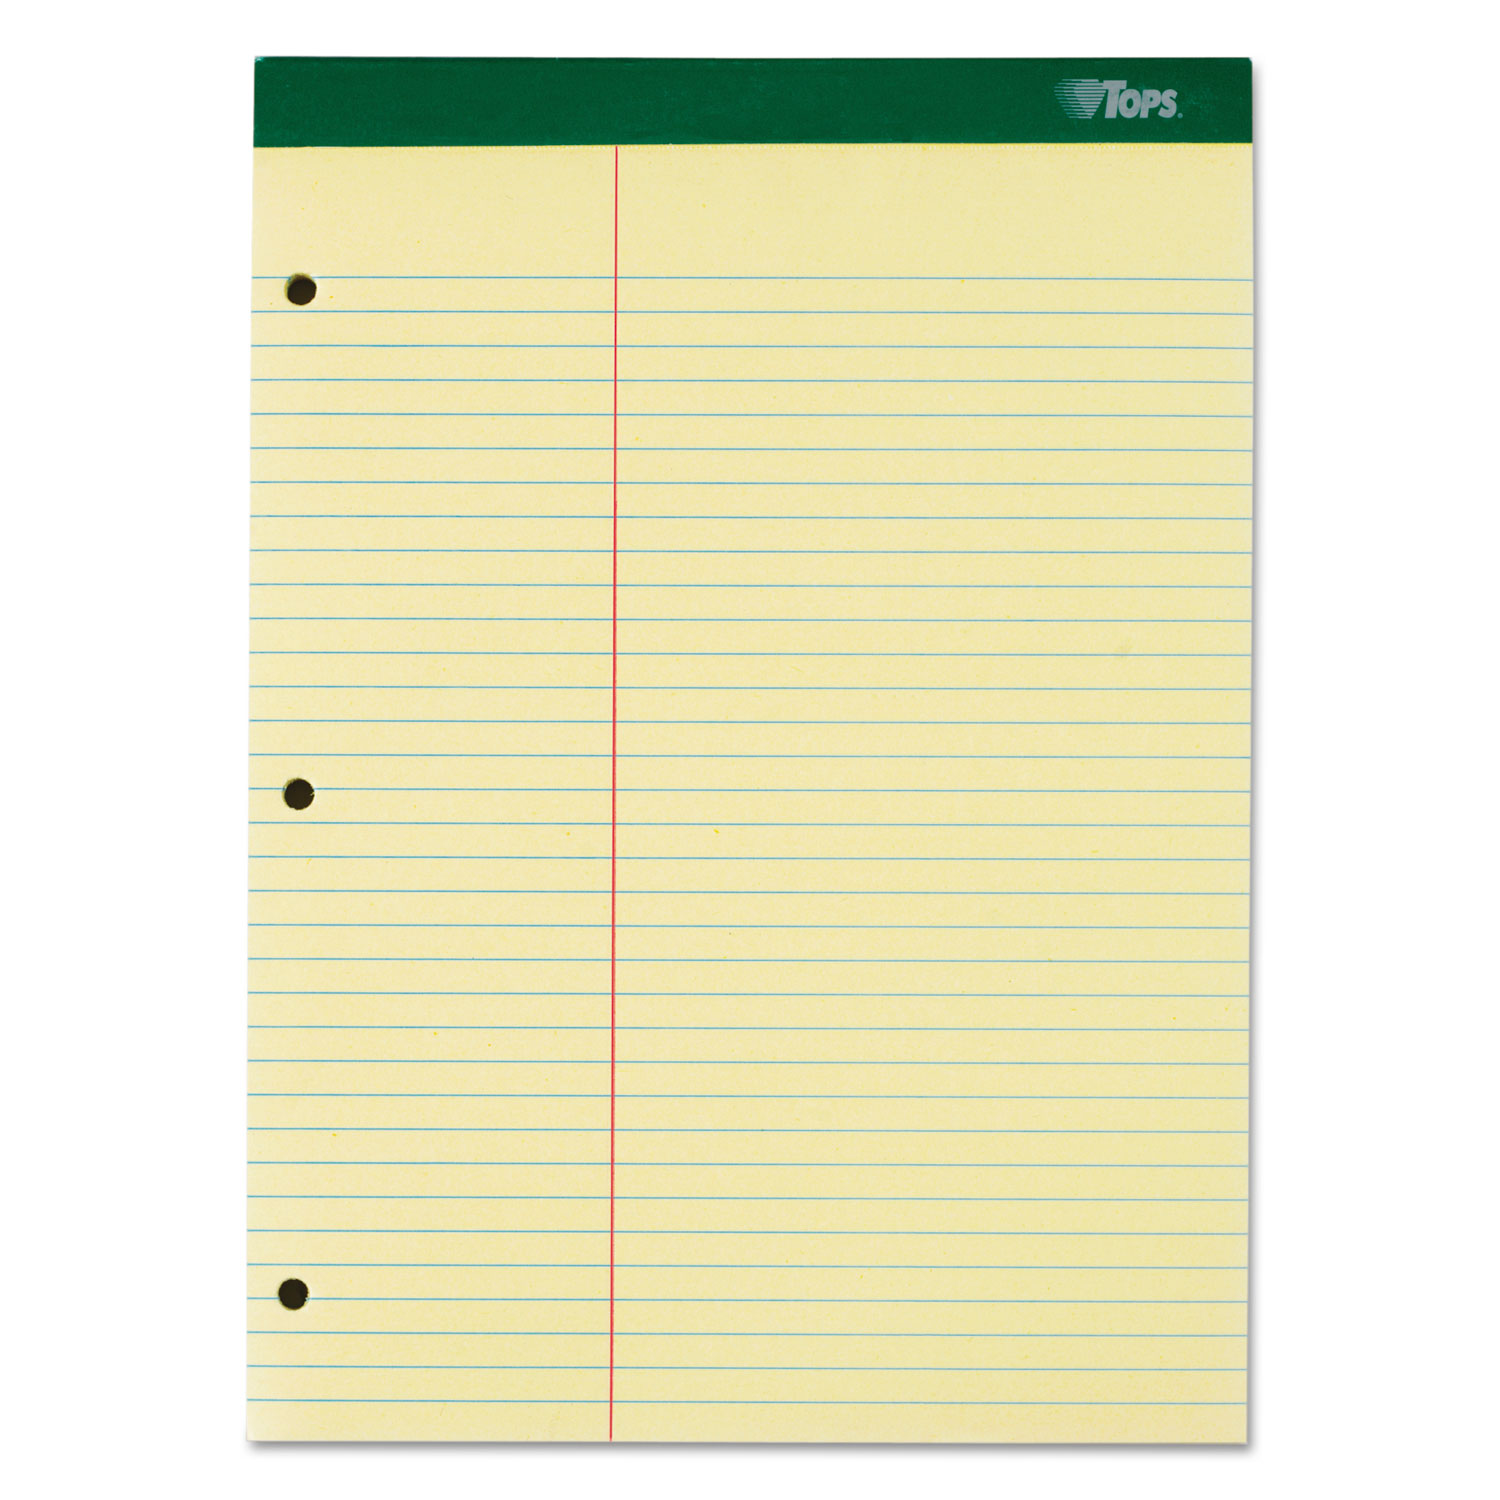  TOPS 63394 Double Docket Ruled Pads, Pitman Rule, 8.5 x 11.75, Canary, 100 Sheets (TOP63394) 